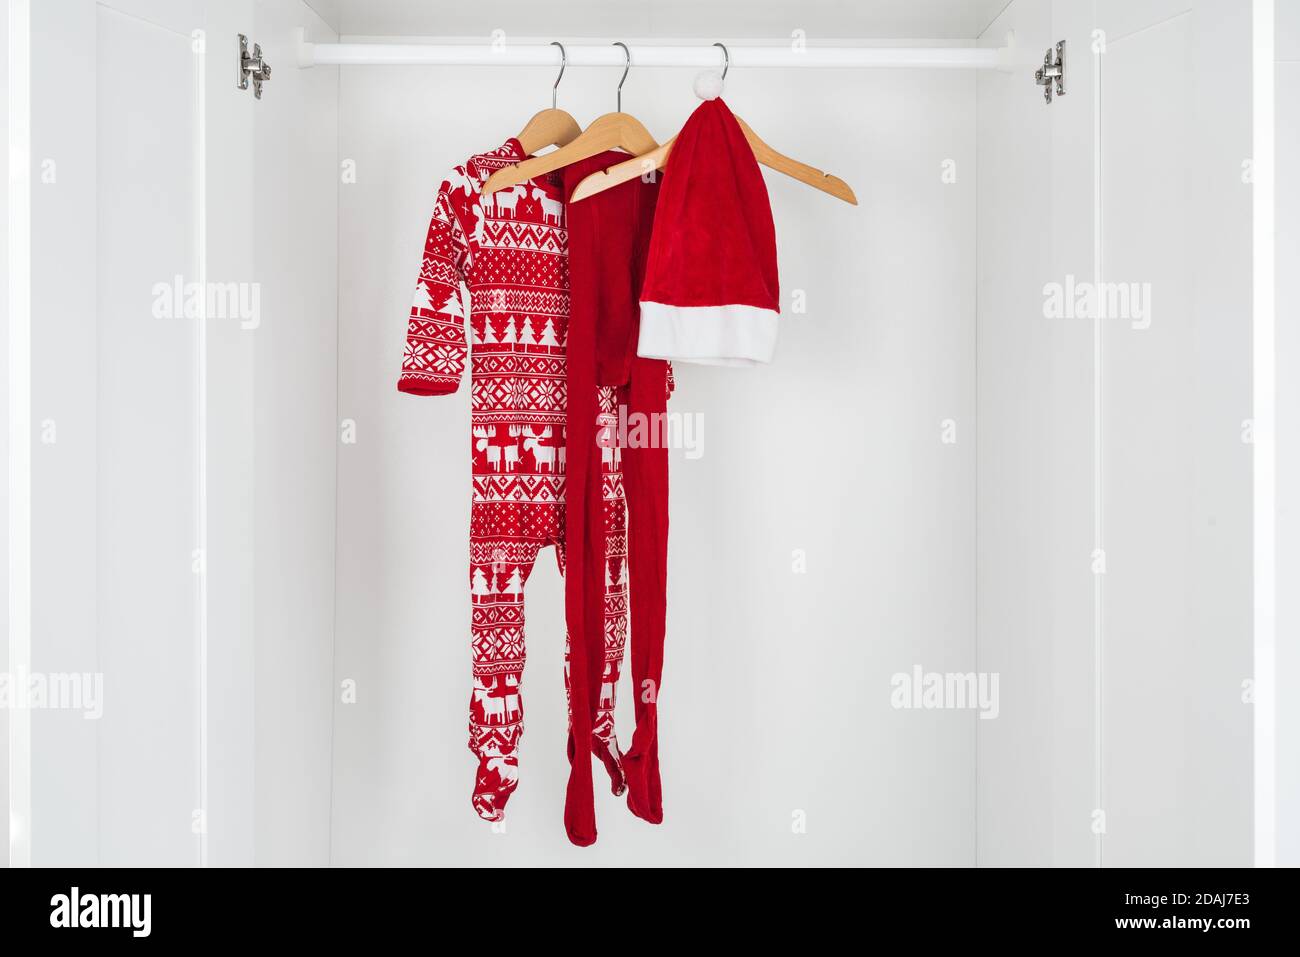 Horizontal color image with a front view of a white and red christmas pajamas, hat and tights hanging on a wooden hangers in the middle of a white clo Stock Photo